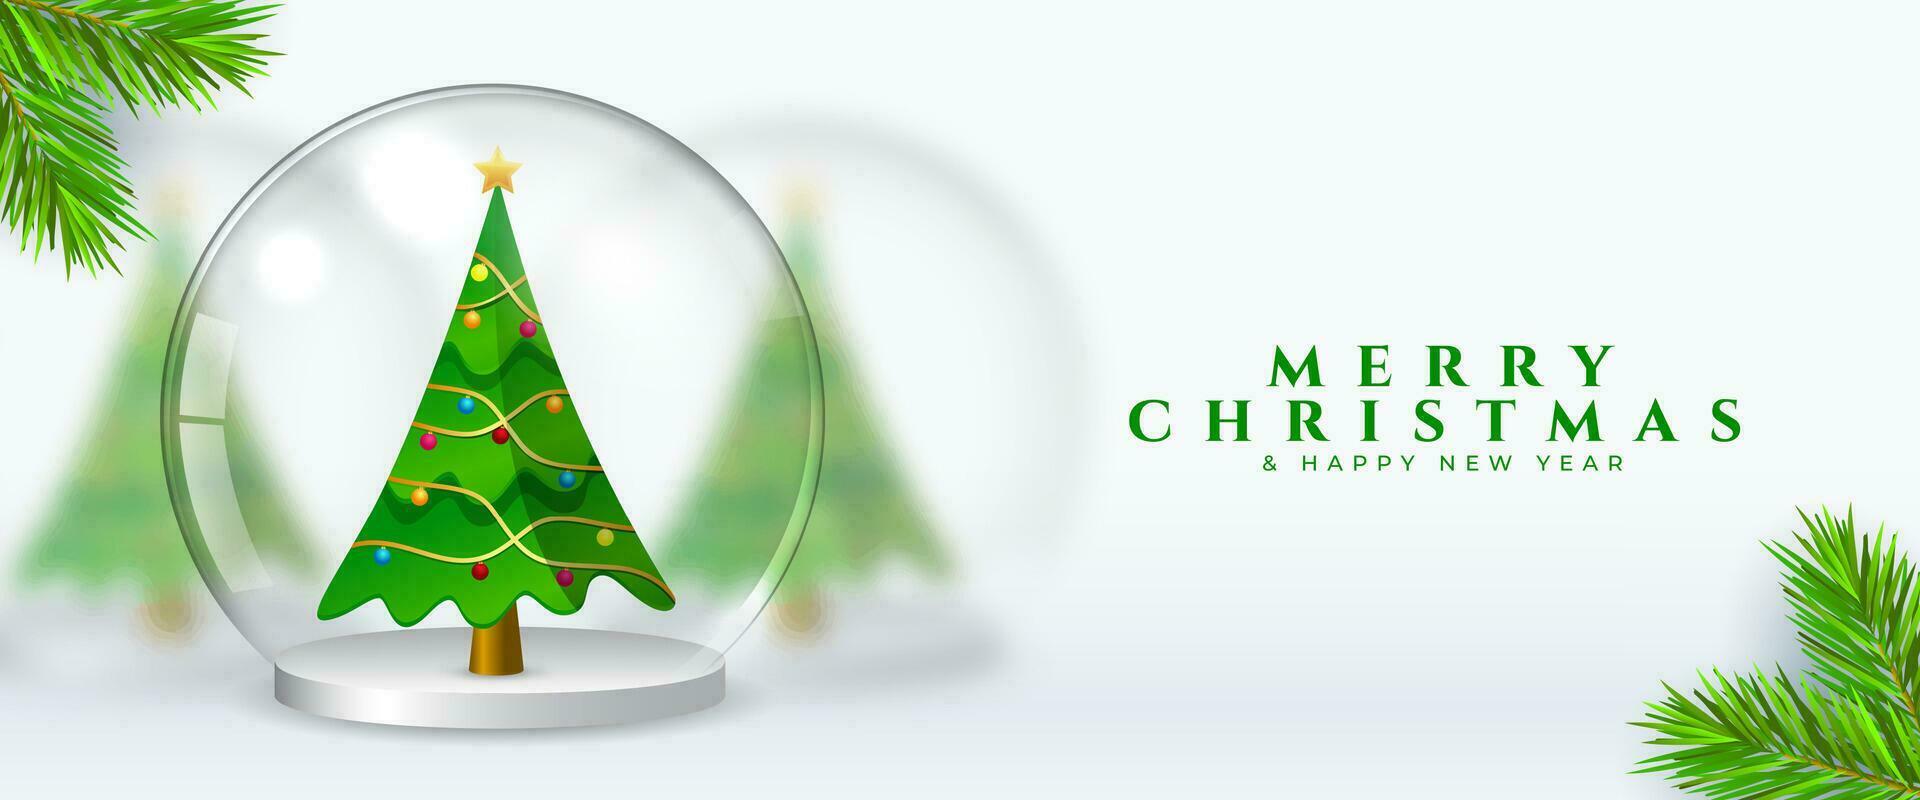 merry christmas event greeting wallpaper with xmas tree and fir decor vector